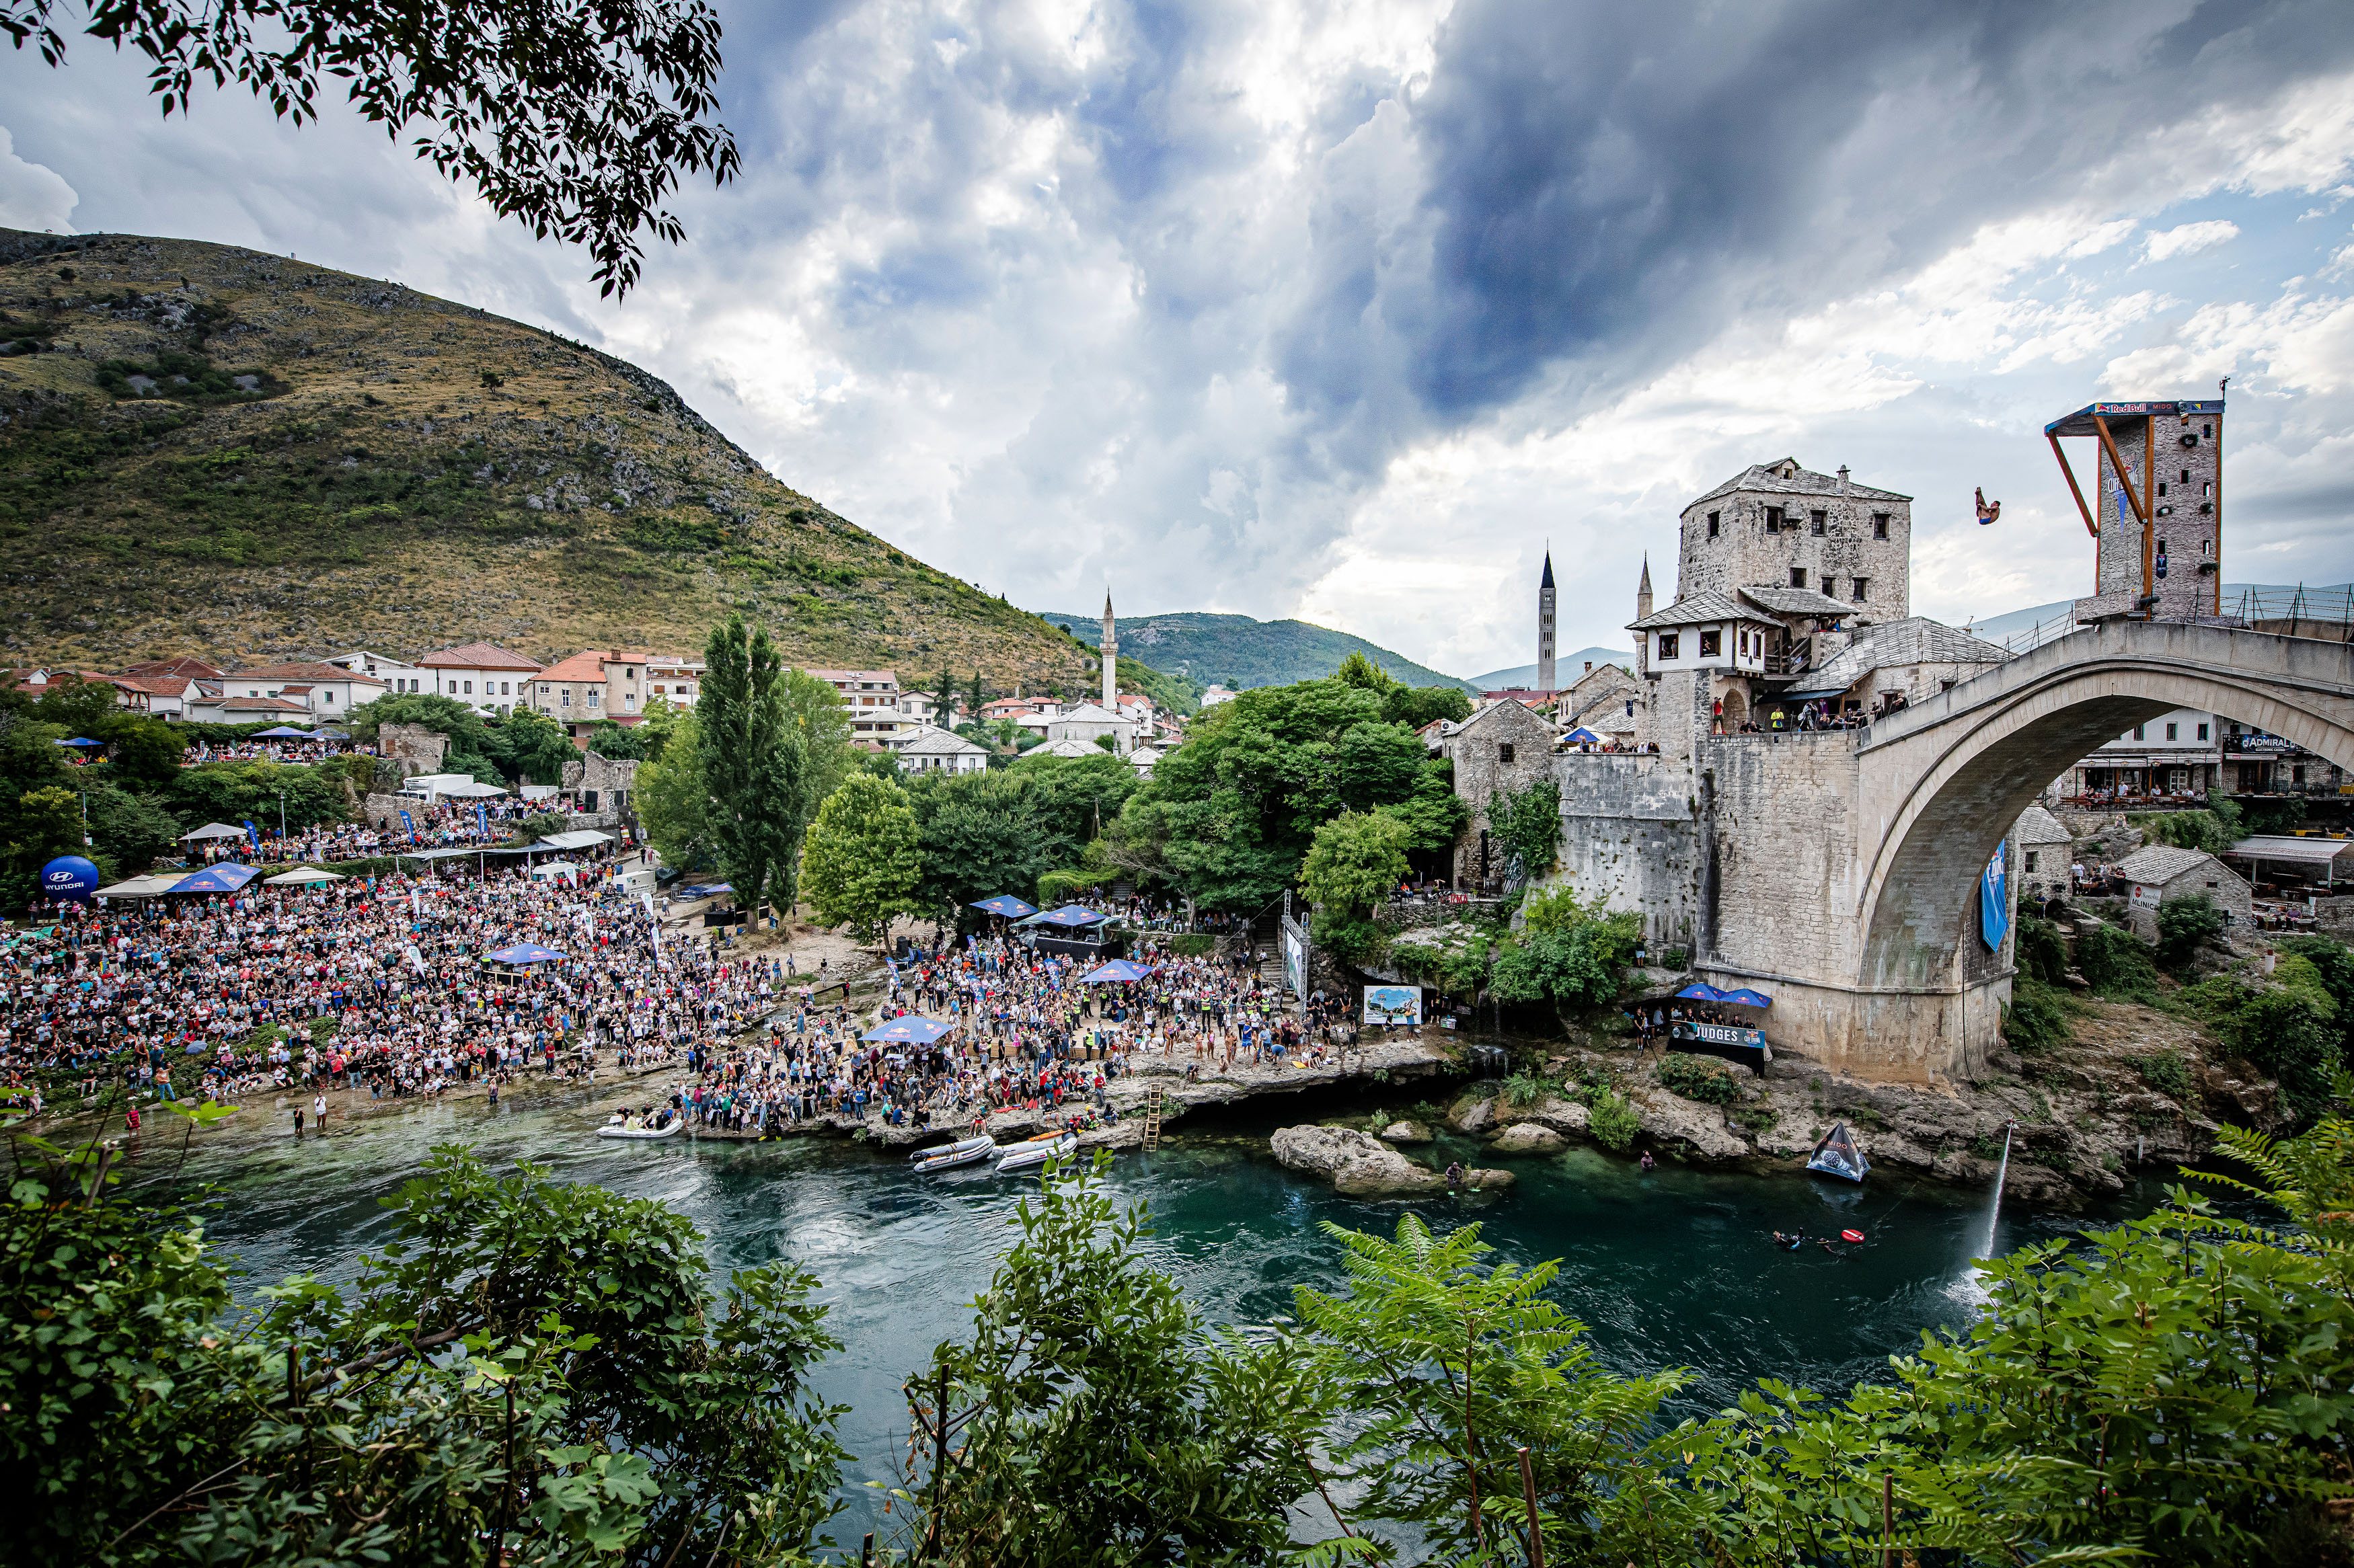 Red Bull Cliff Diving World Series 2021 - Mostar